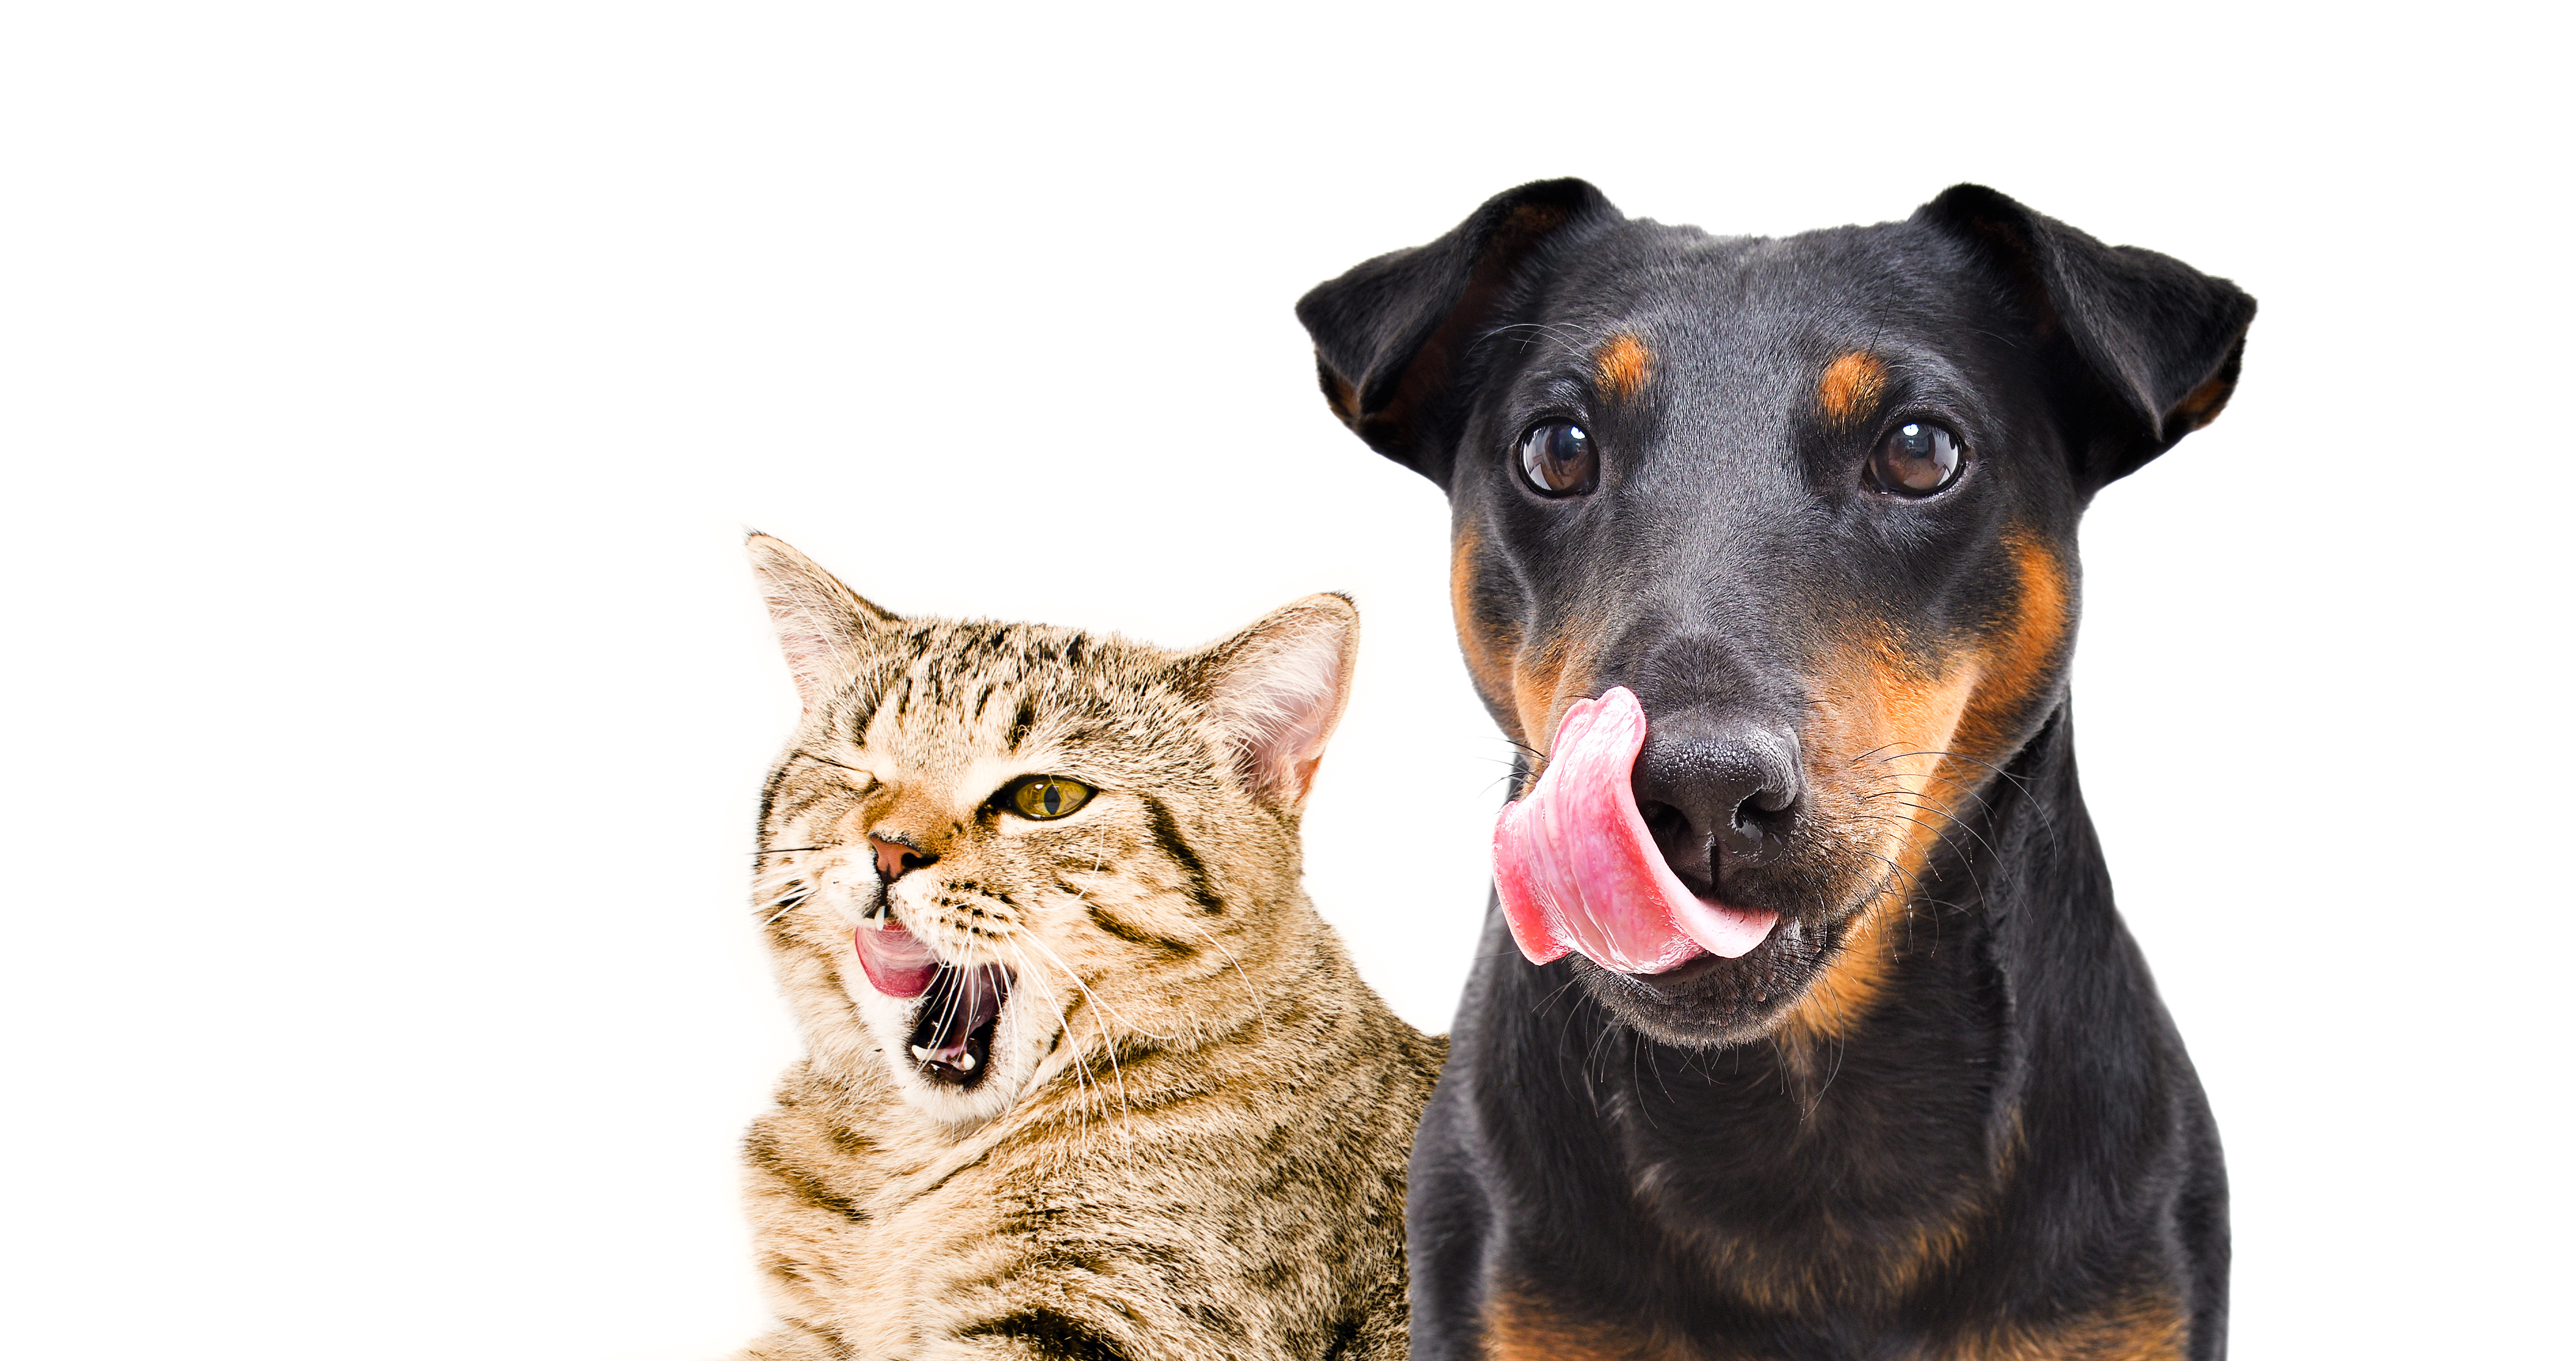 A dog and a cat lick their mouths